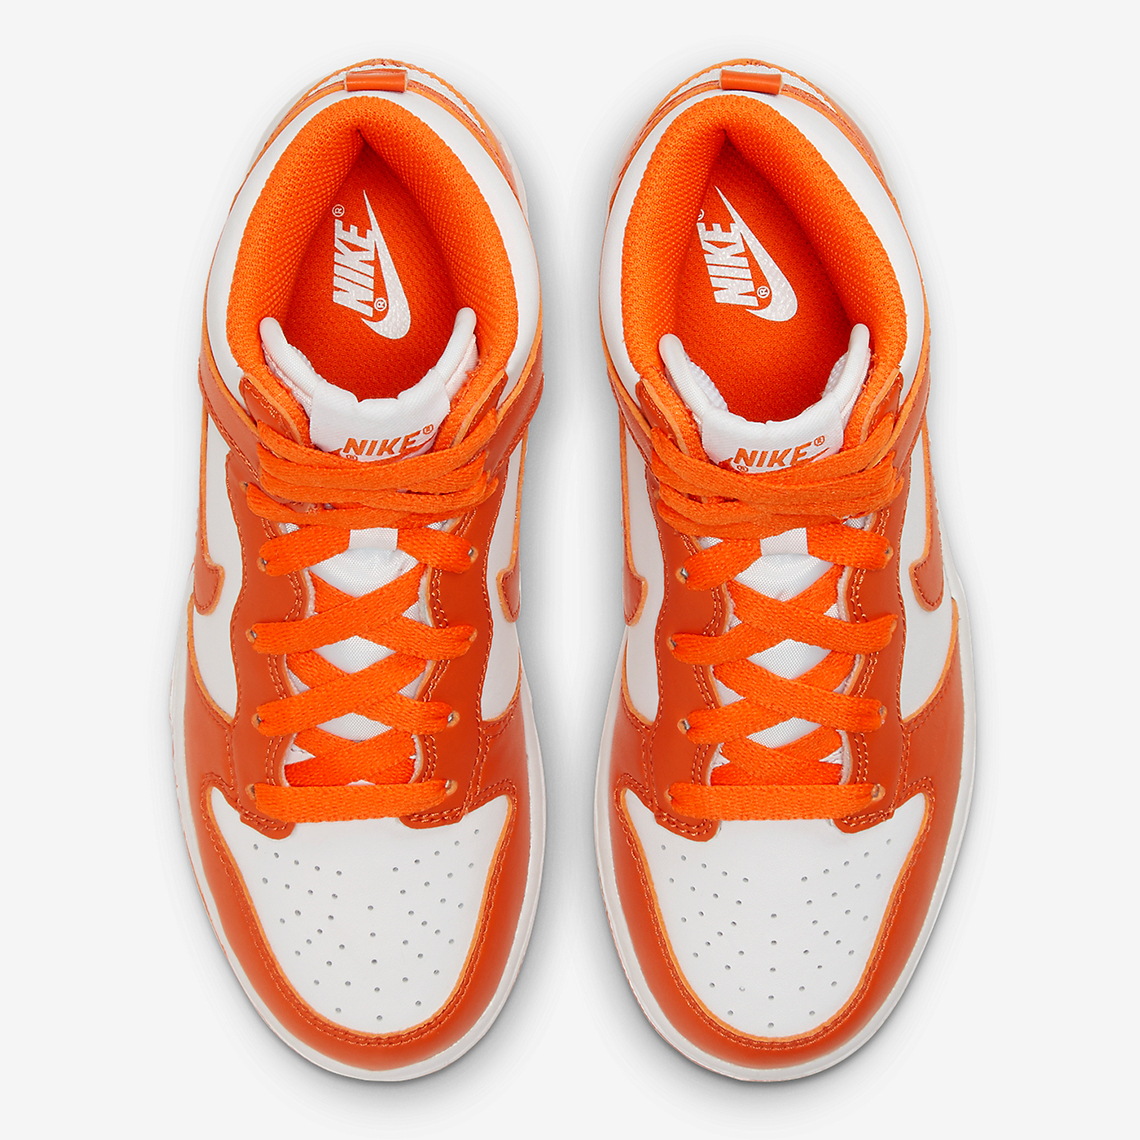 nike with air icarus running shoes Syracuse White Orange Blaze Little Kids Dd2314 1008